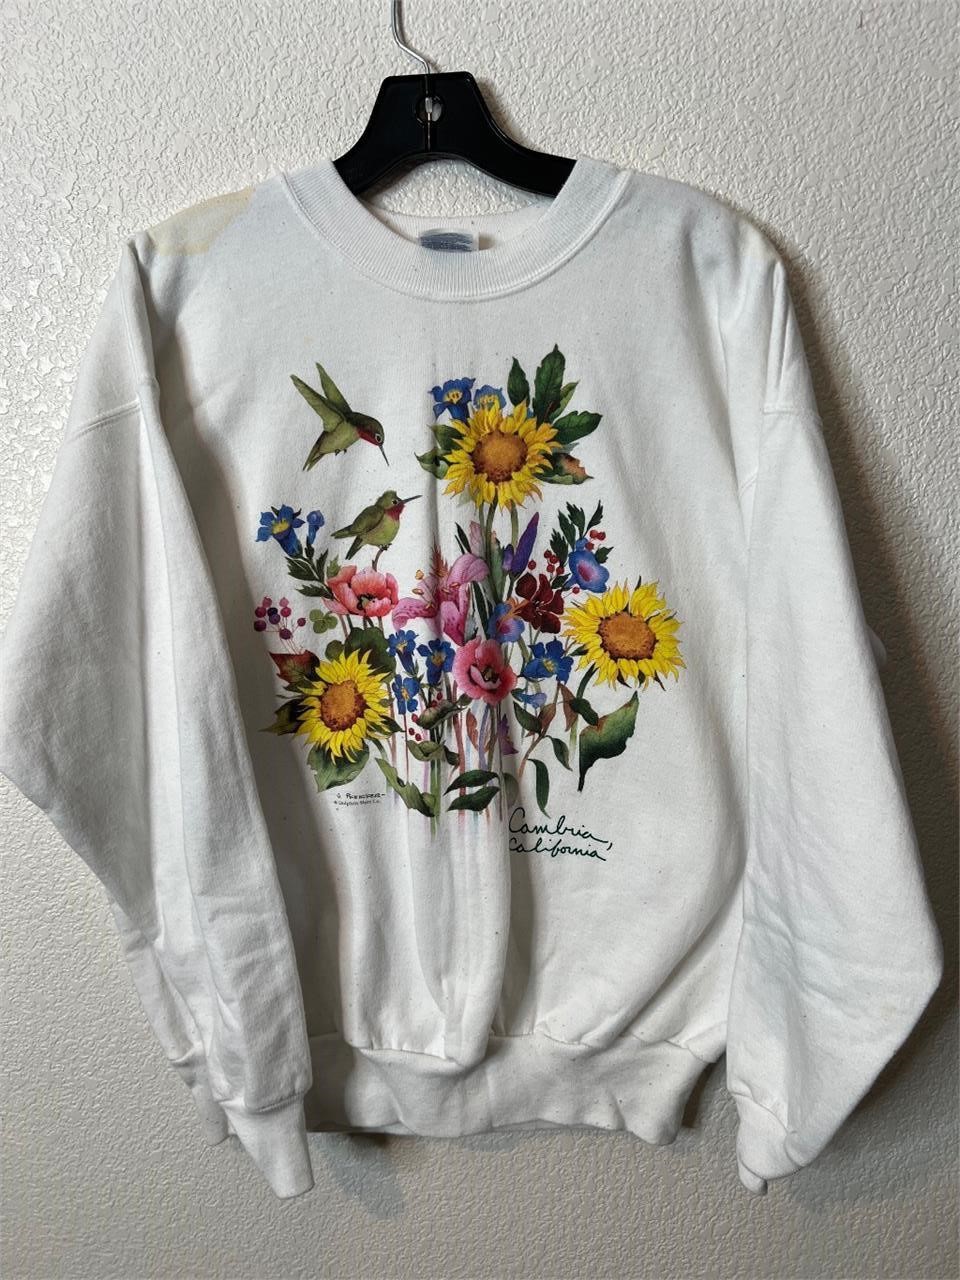 5/23/24 Vintage Clothing Auction